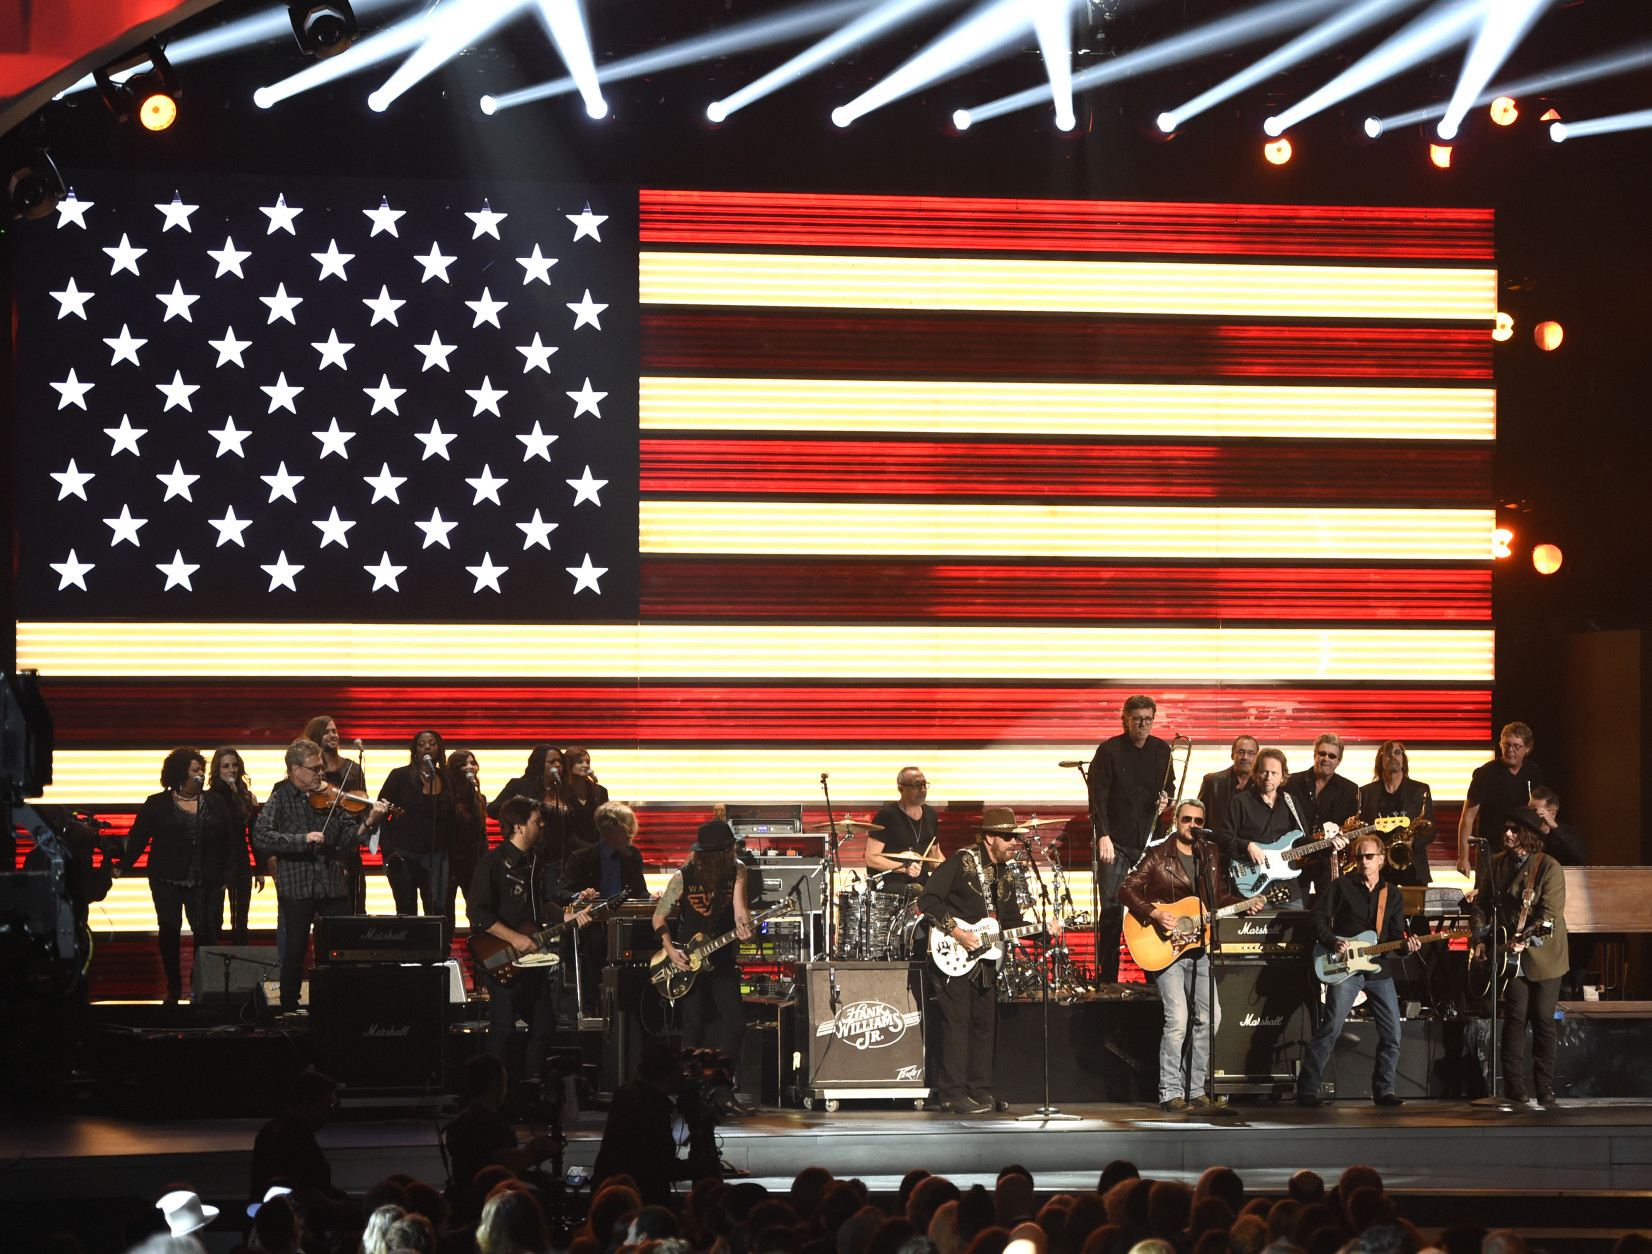 Hank Williams Jr., left, and Eric Church perform at the 49th annual CMA Awards at the Bridgestone Arena on Wednesday, Nov. 4, 2015, in Nashville, Tenn. (Photo by Chris Pizzello/Invision/AP)